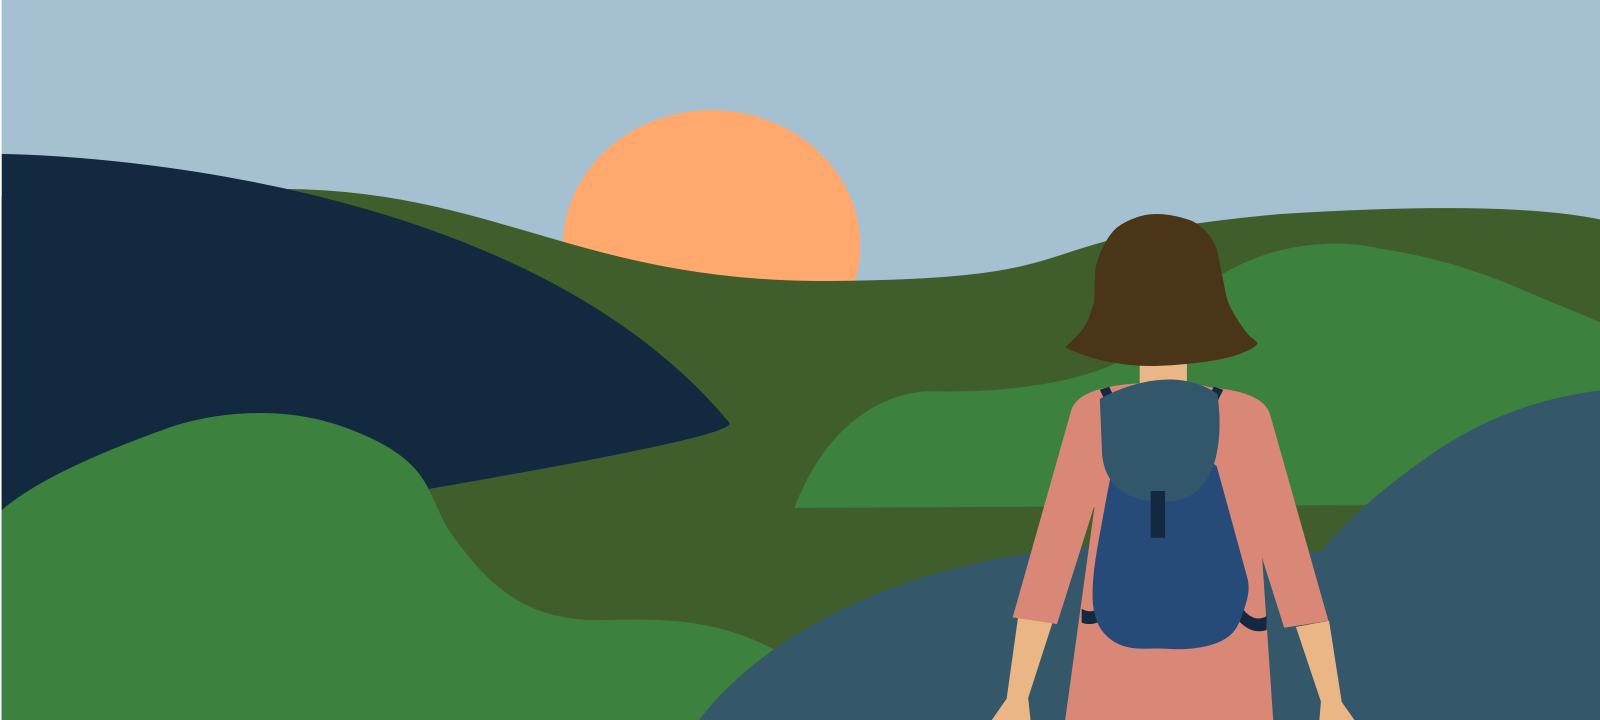 How to get better sleep: A woman walking in the sunny countryside to help regulate her body clock.